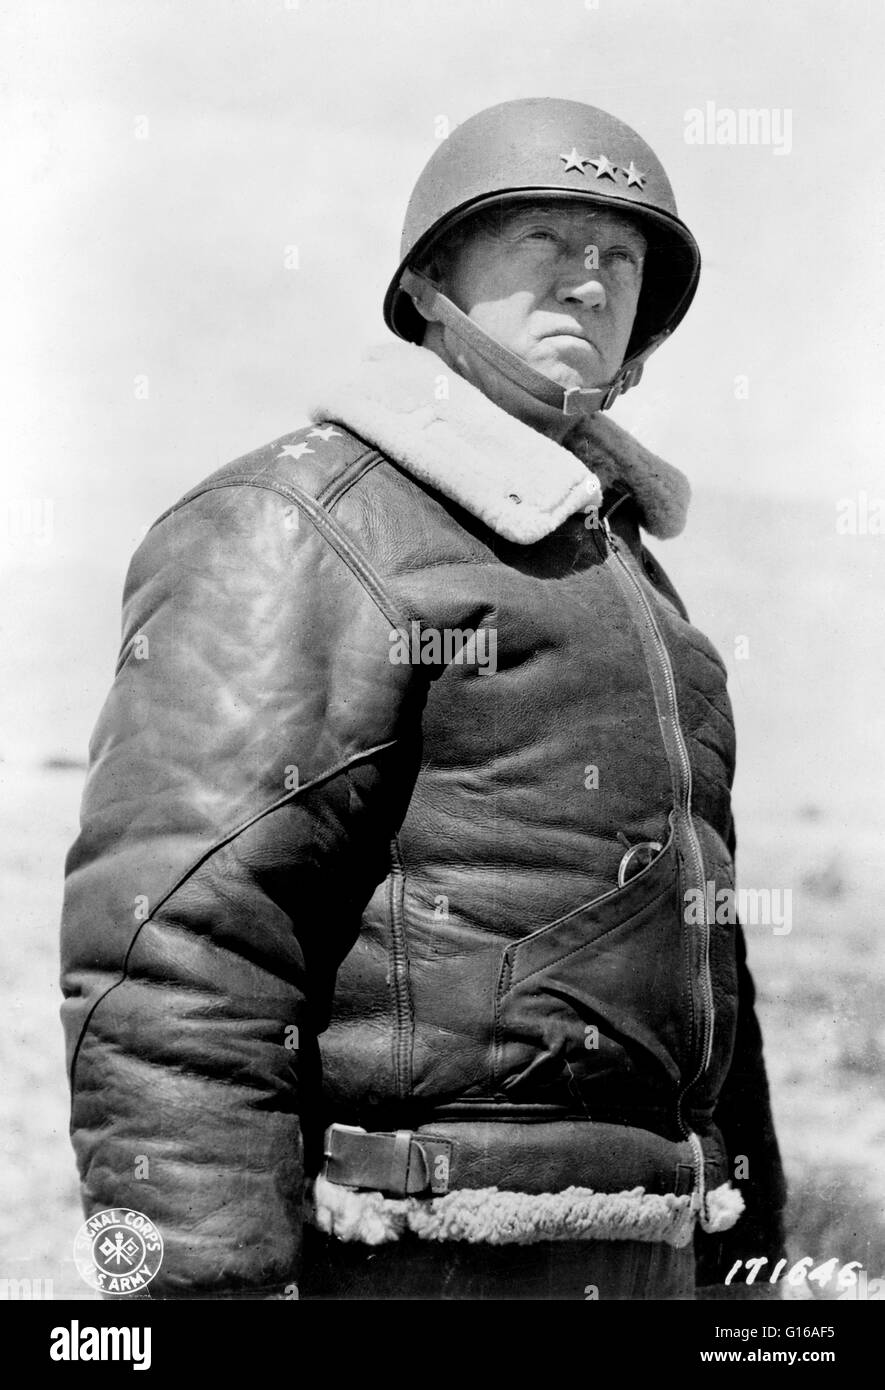 Lieutenant General Patton wearing leather jacket and helmet with three stars, March 30, 1943. George Smith Patton, Jr. (November 11, 1885 - December 21, 1945) was a general in the United States Army best known for his command of the Seventh United States Stock Photo